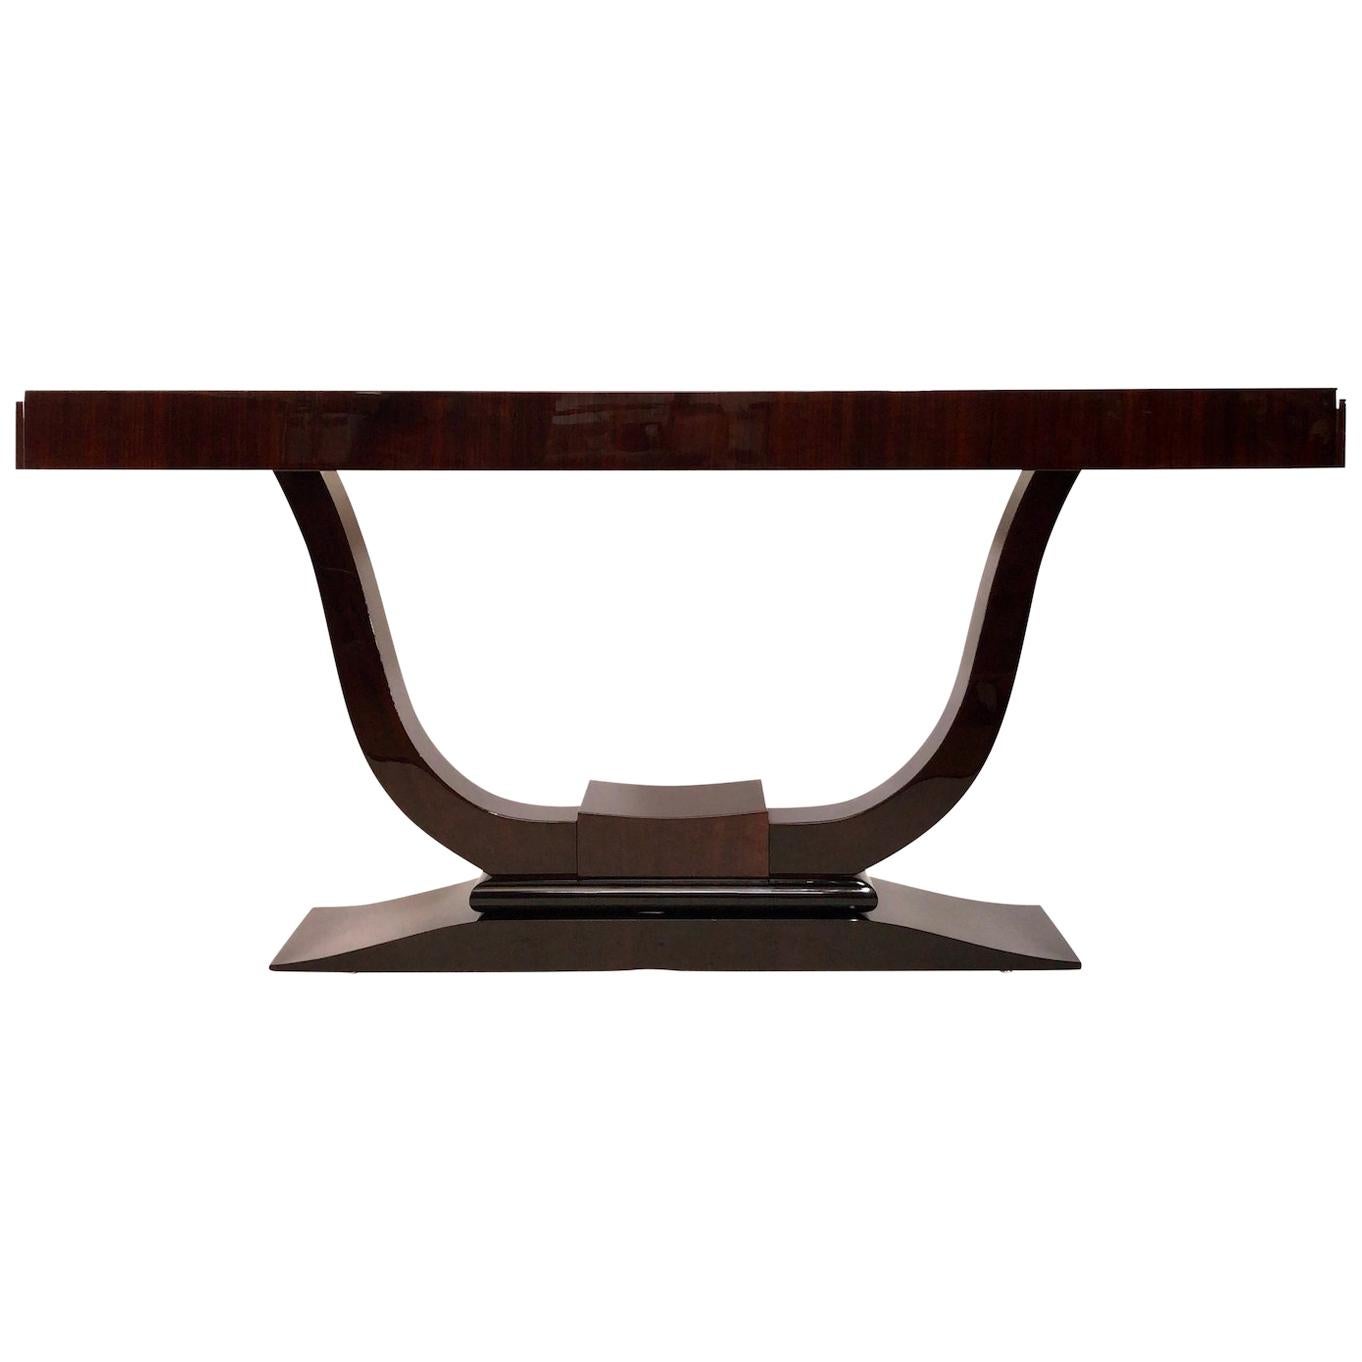 Large 1930s Art Deco Lyra Shaped Console Table in Real Wood Veneer For Sale